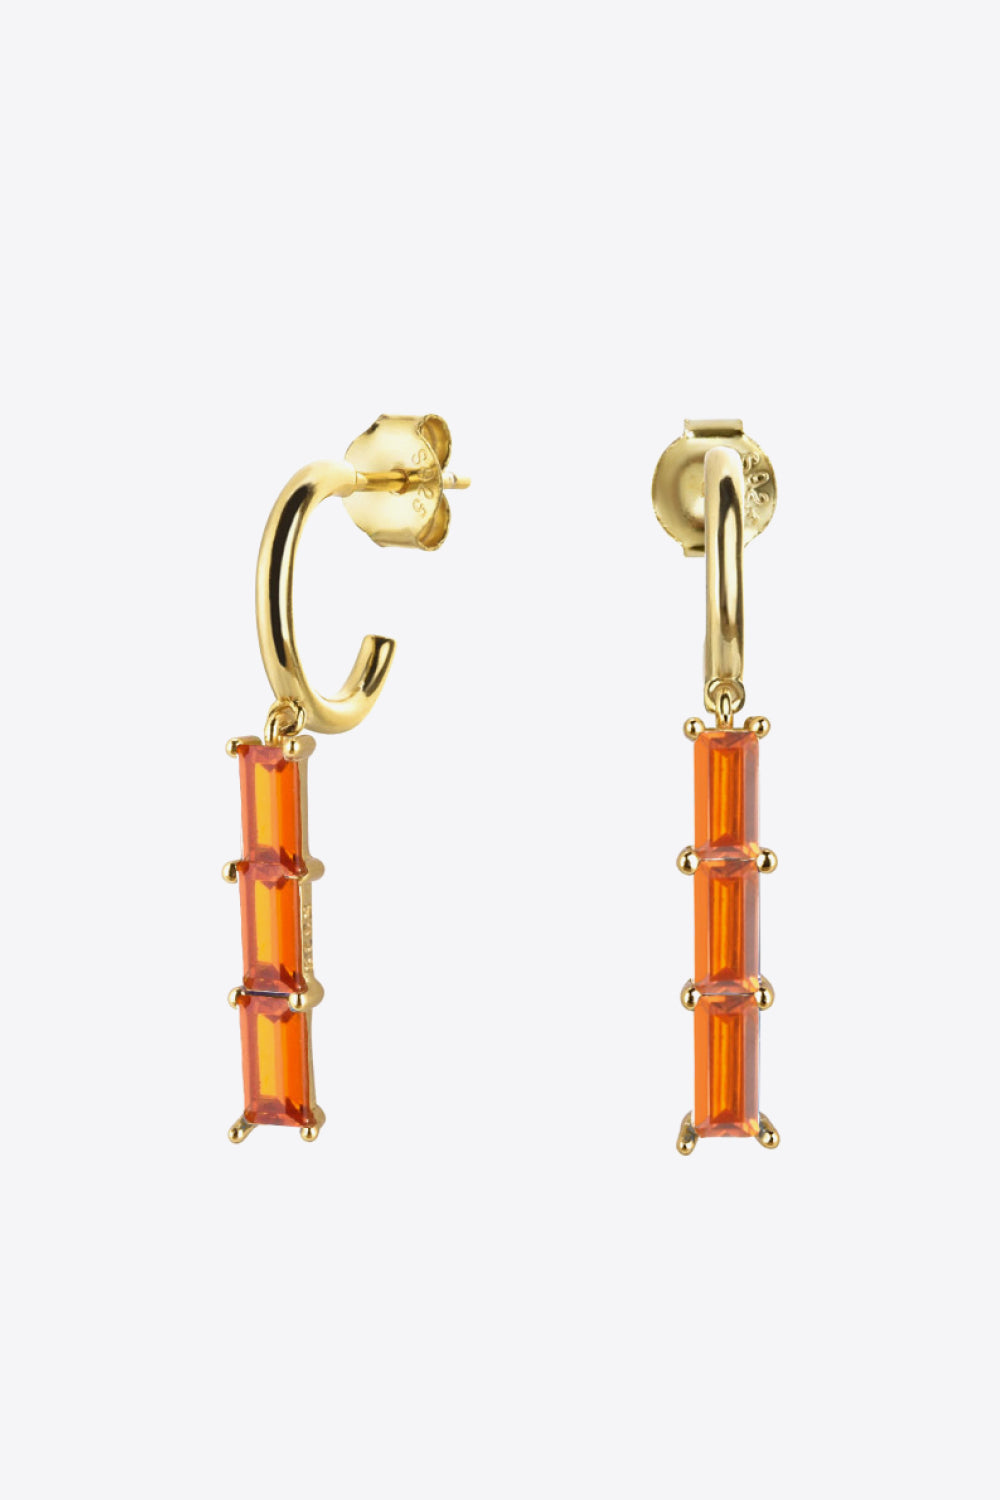 GOLD/ORANGE ONE SIZE - Inlaid Zircon 925 Sterling Silver Earrings - 7 colors - earrings at TFC&H Co.